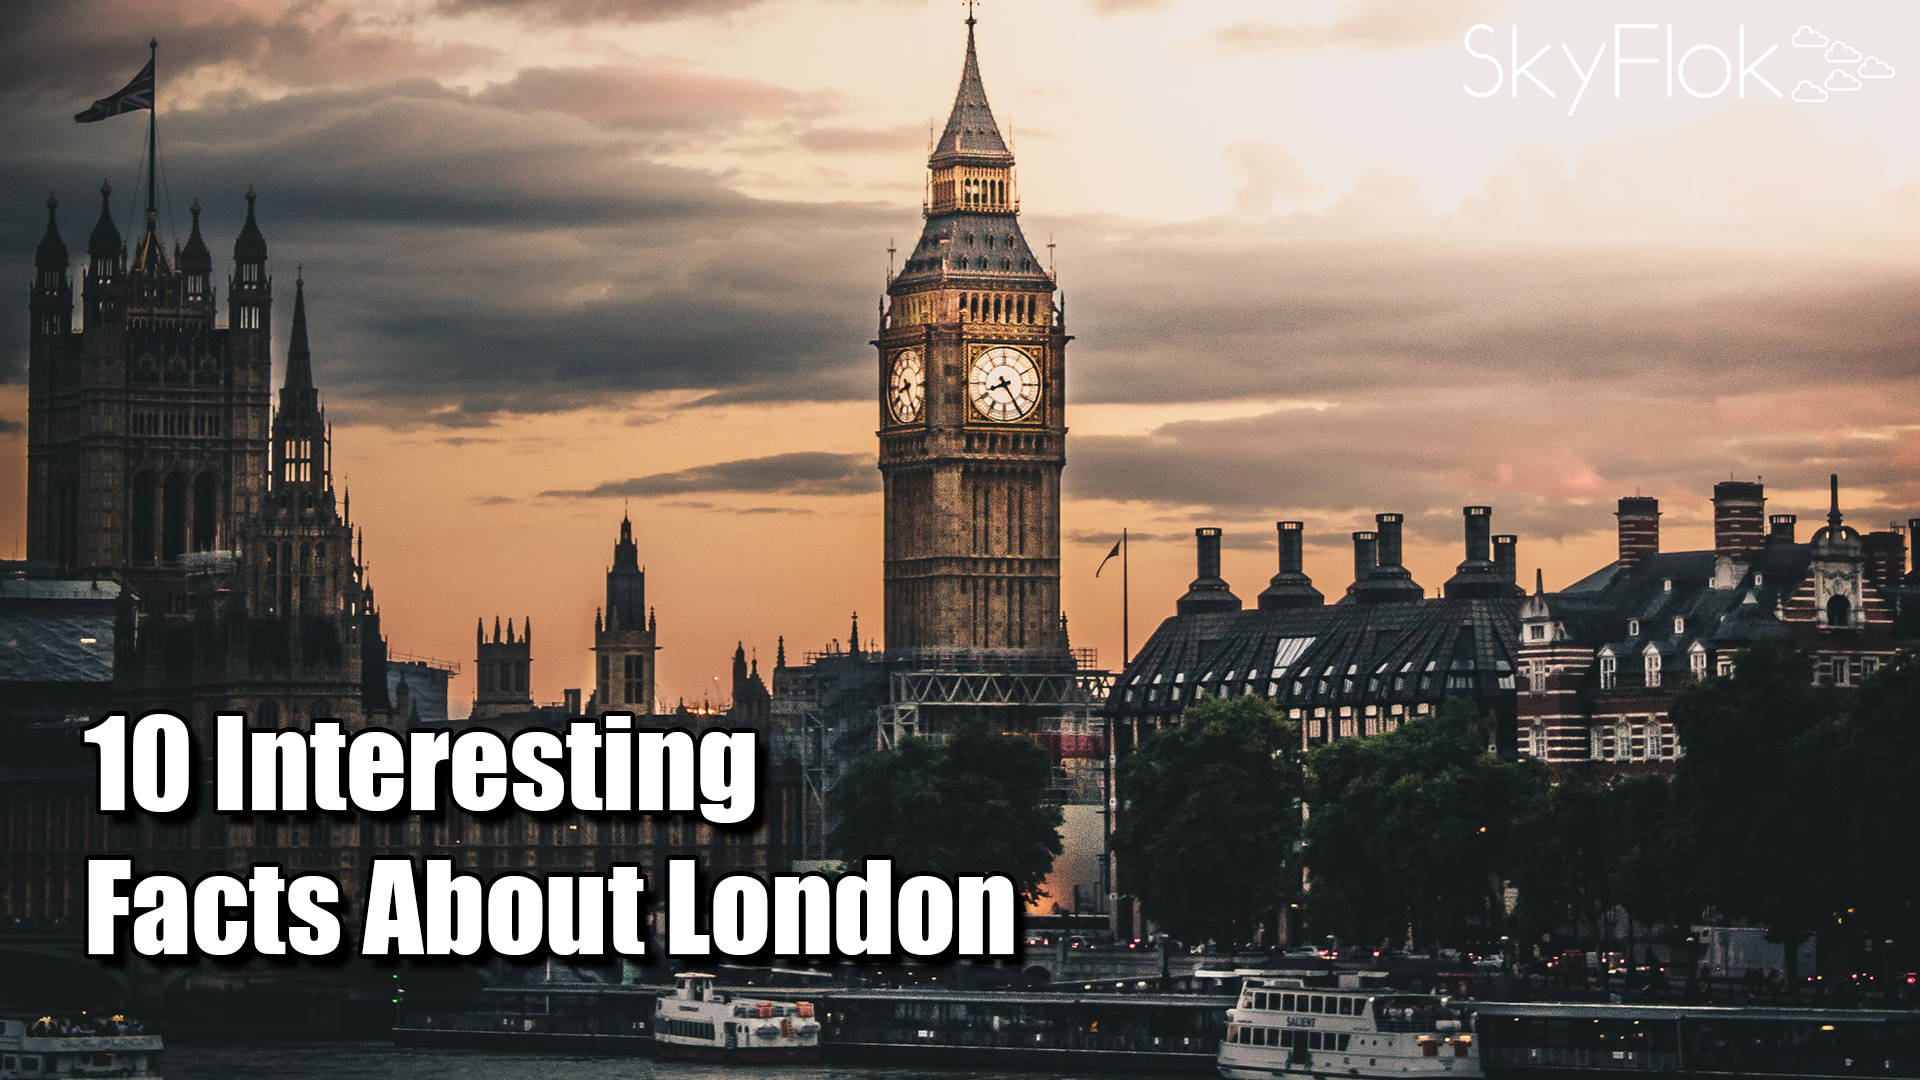 10 interesting facts about London